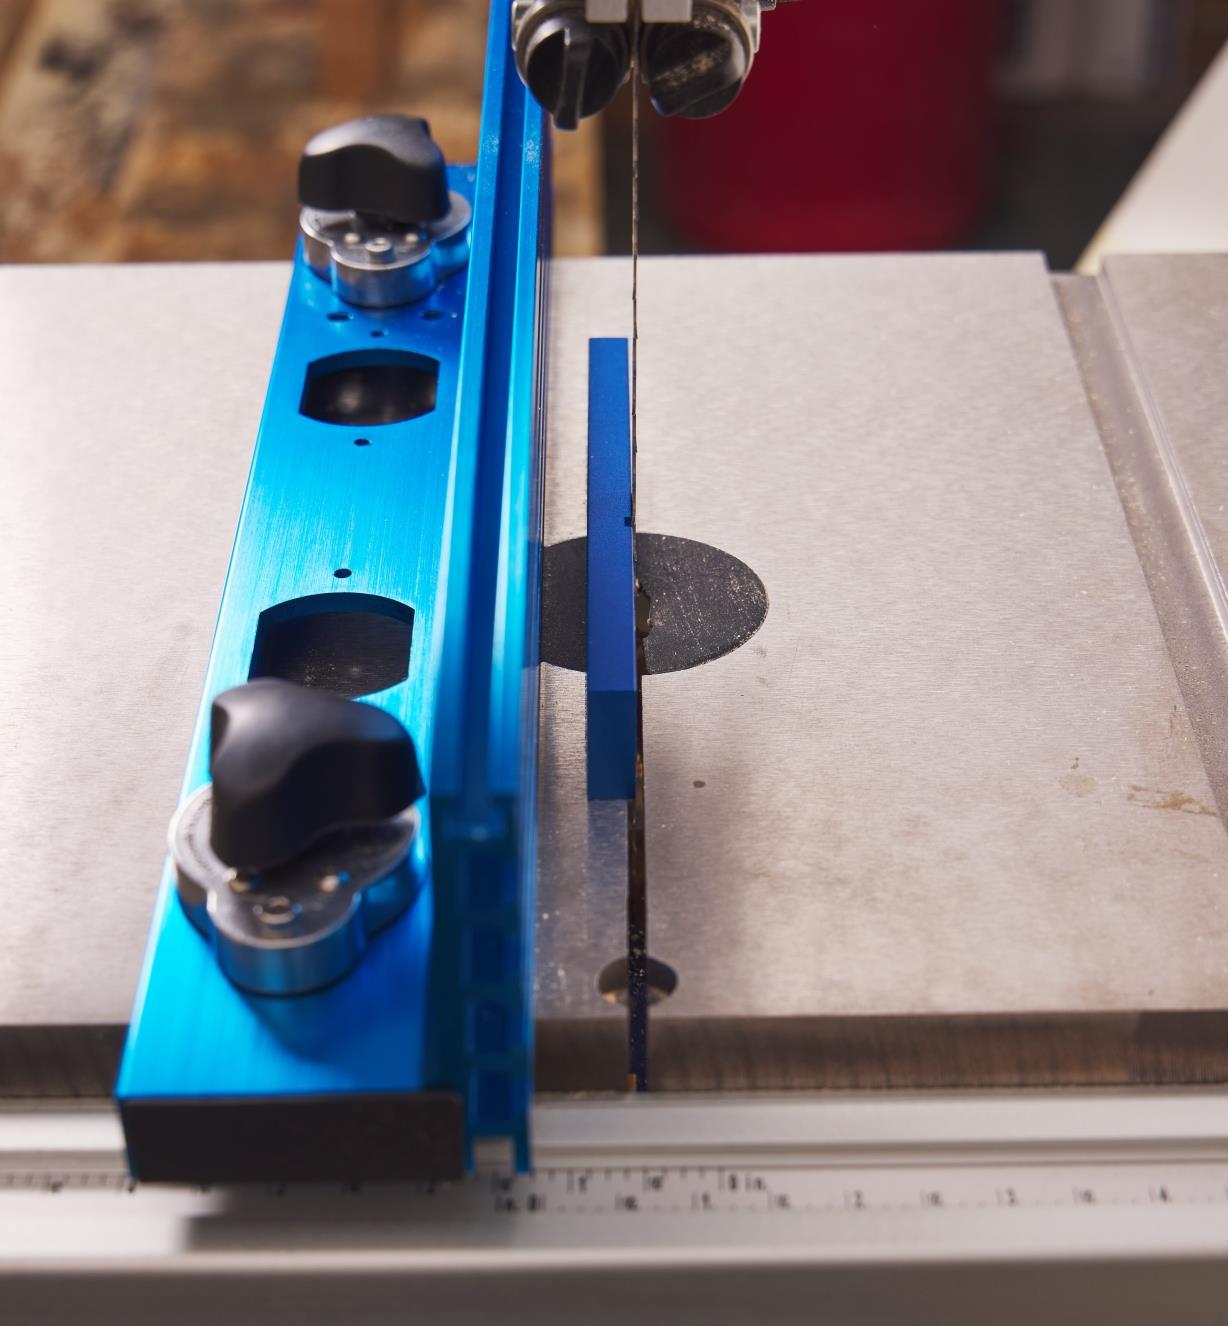 A F.A.S.T. fence magnetic block attached to a bandsaw blade, with a magnetic fence to the left of it, ready for alignment